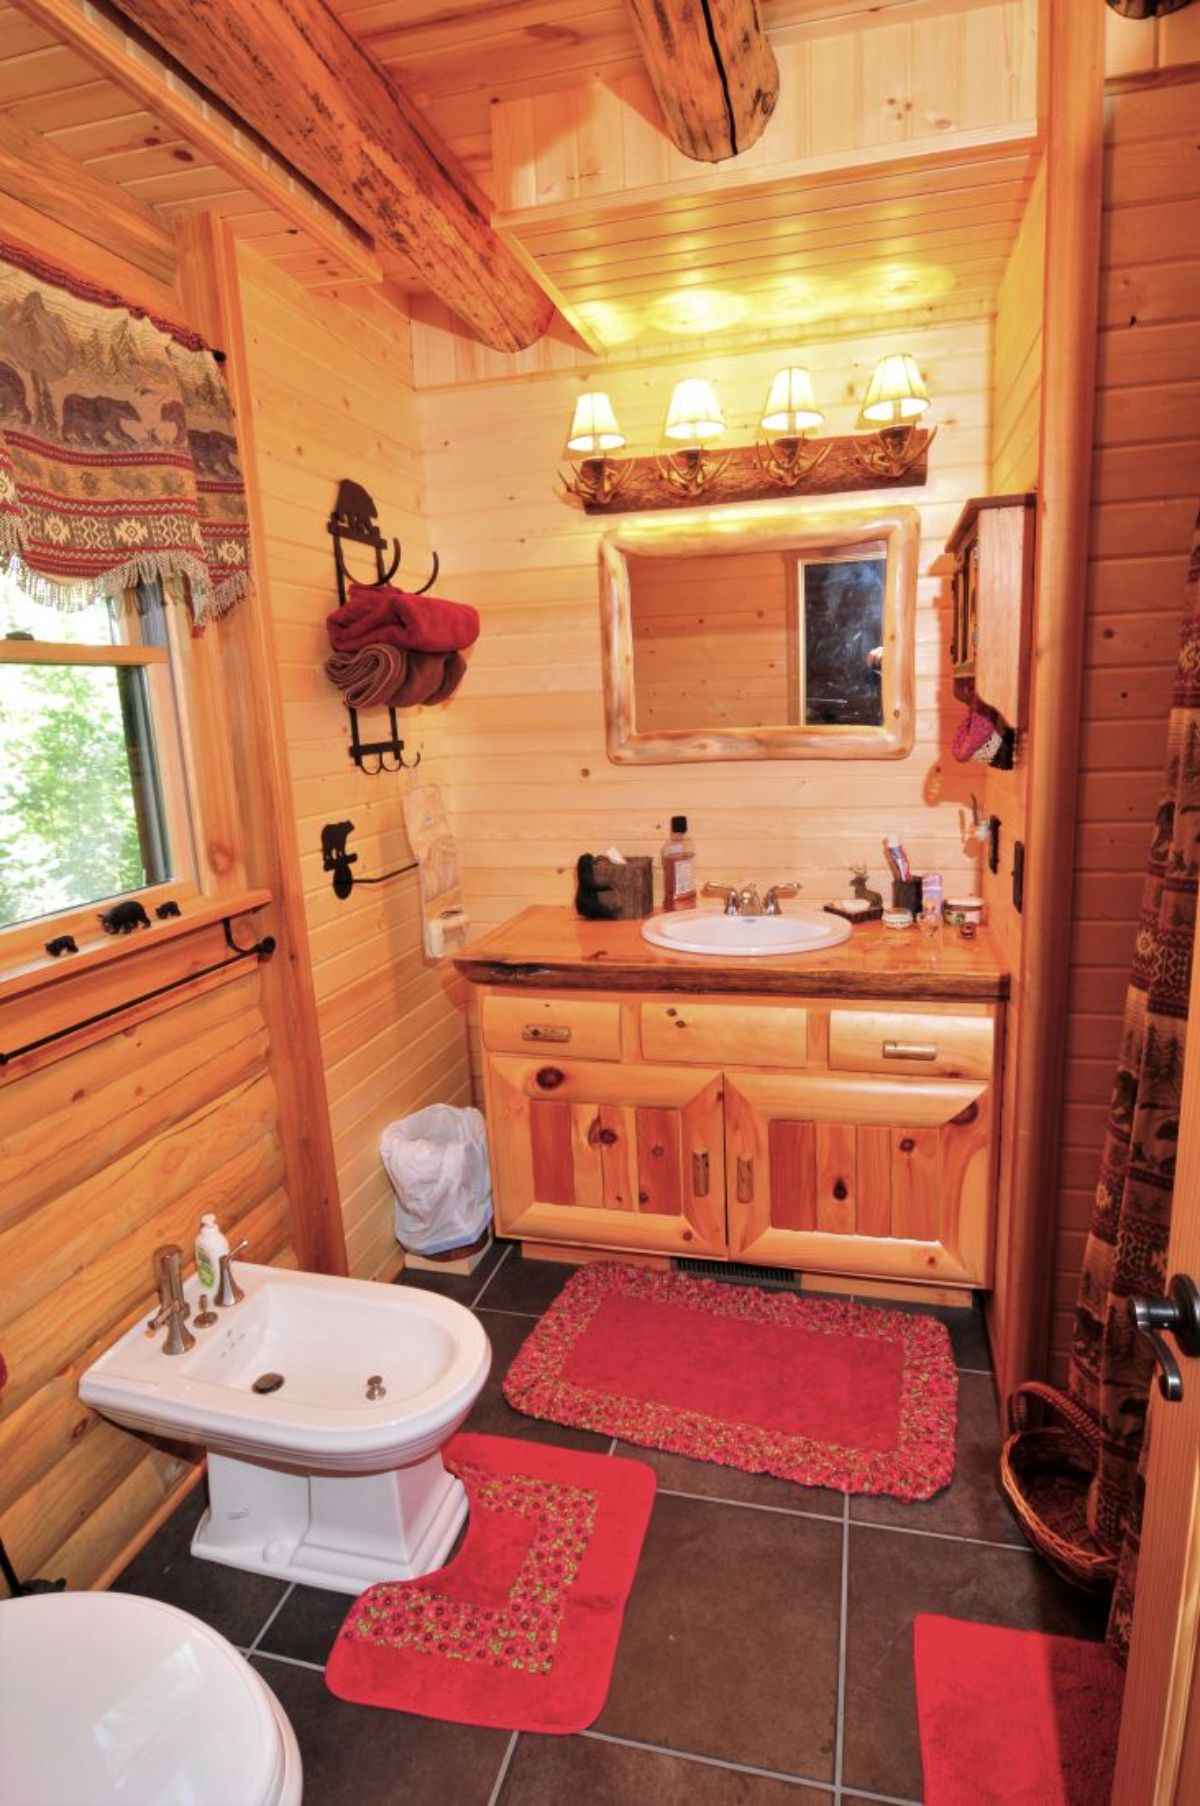 red rug on floor in front of bidet with light wood cabinet under mirror